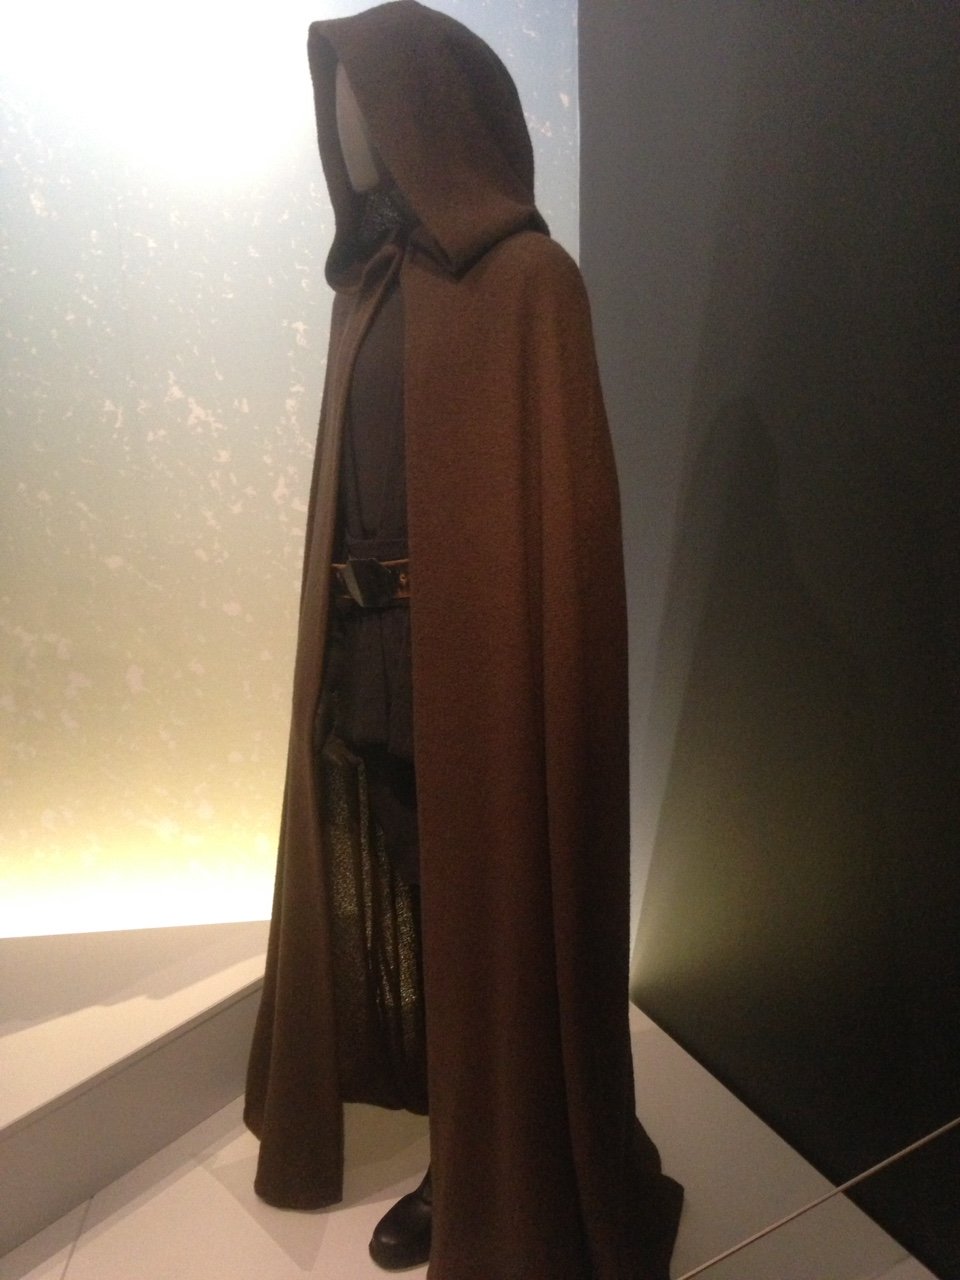 Plenty of reference pictures from Star wars exhibit in Florida | Page 2 ...